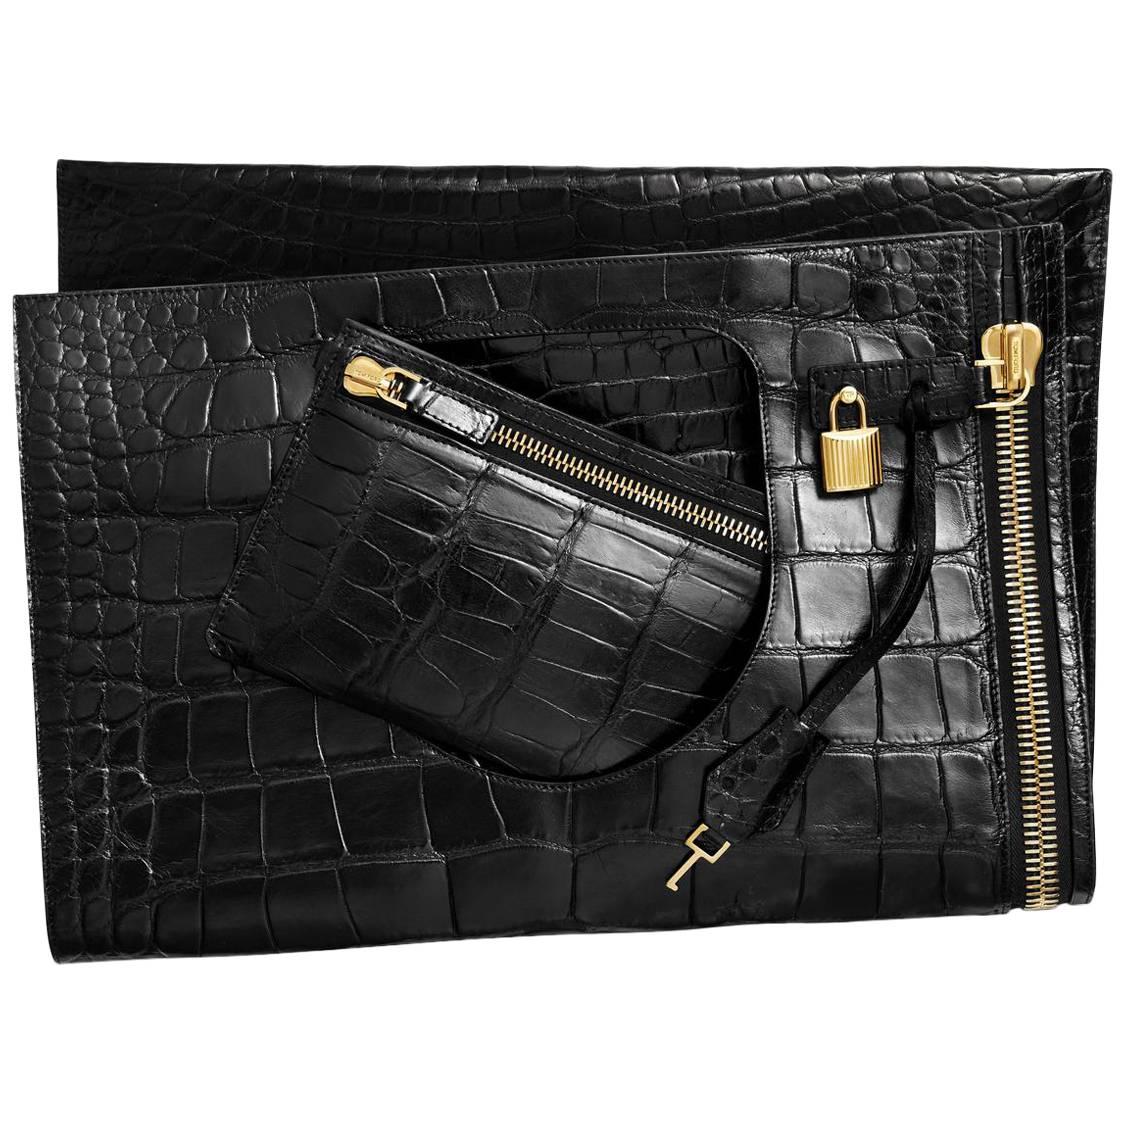 Tom Ford Black Alligator Lock Fold Evening Tote Clutch Flap Bag with Accessories